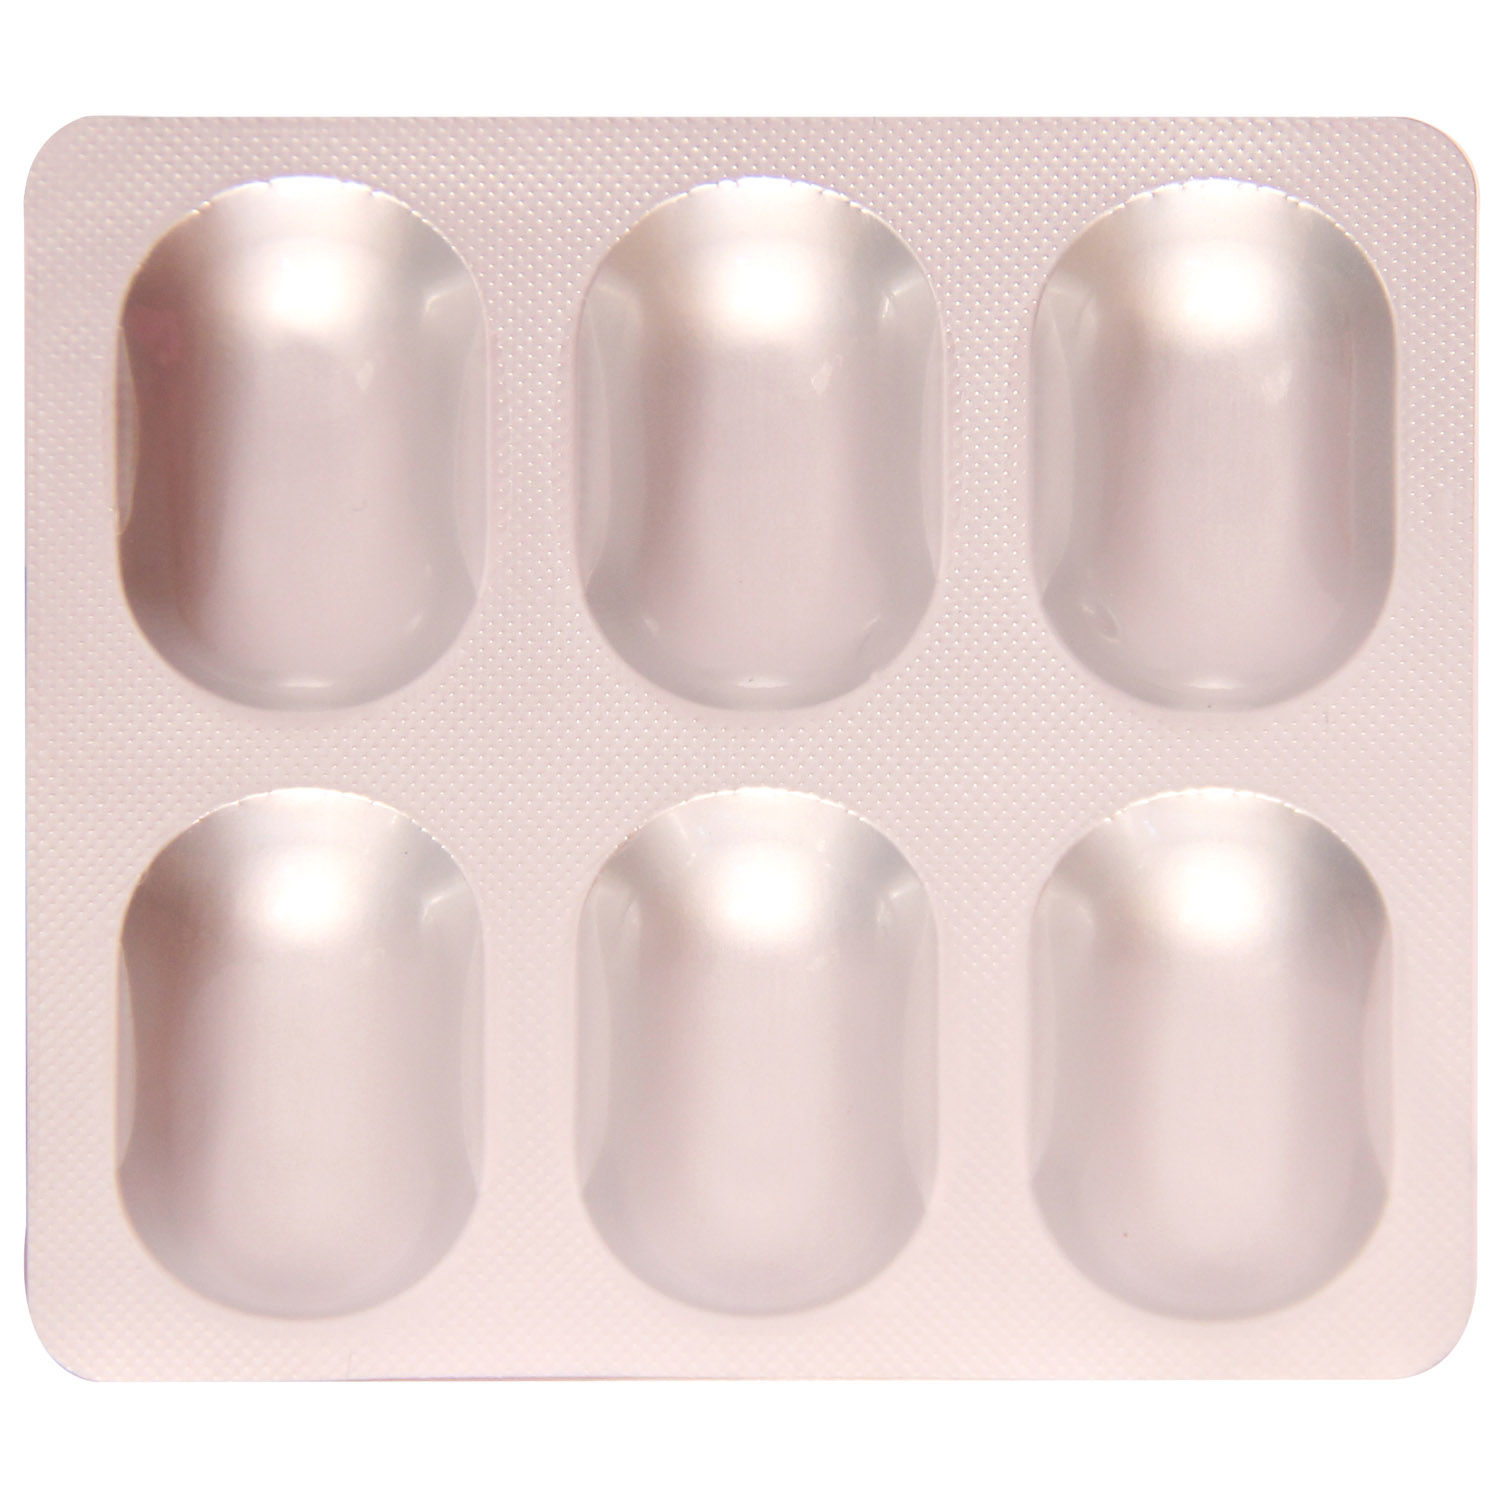 Ceroxim XP 625 mg Tablet 6's Price, Uses, Side Effects, Composition ...